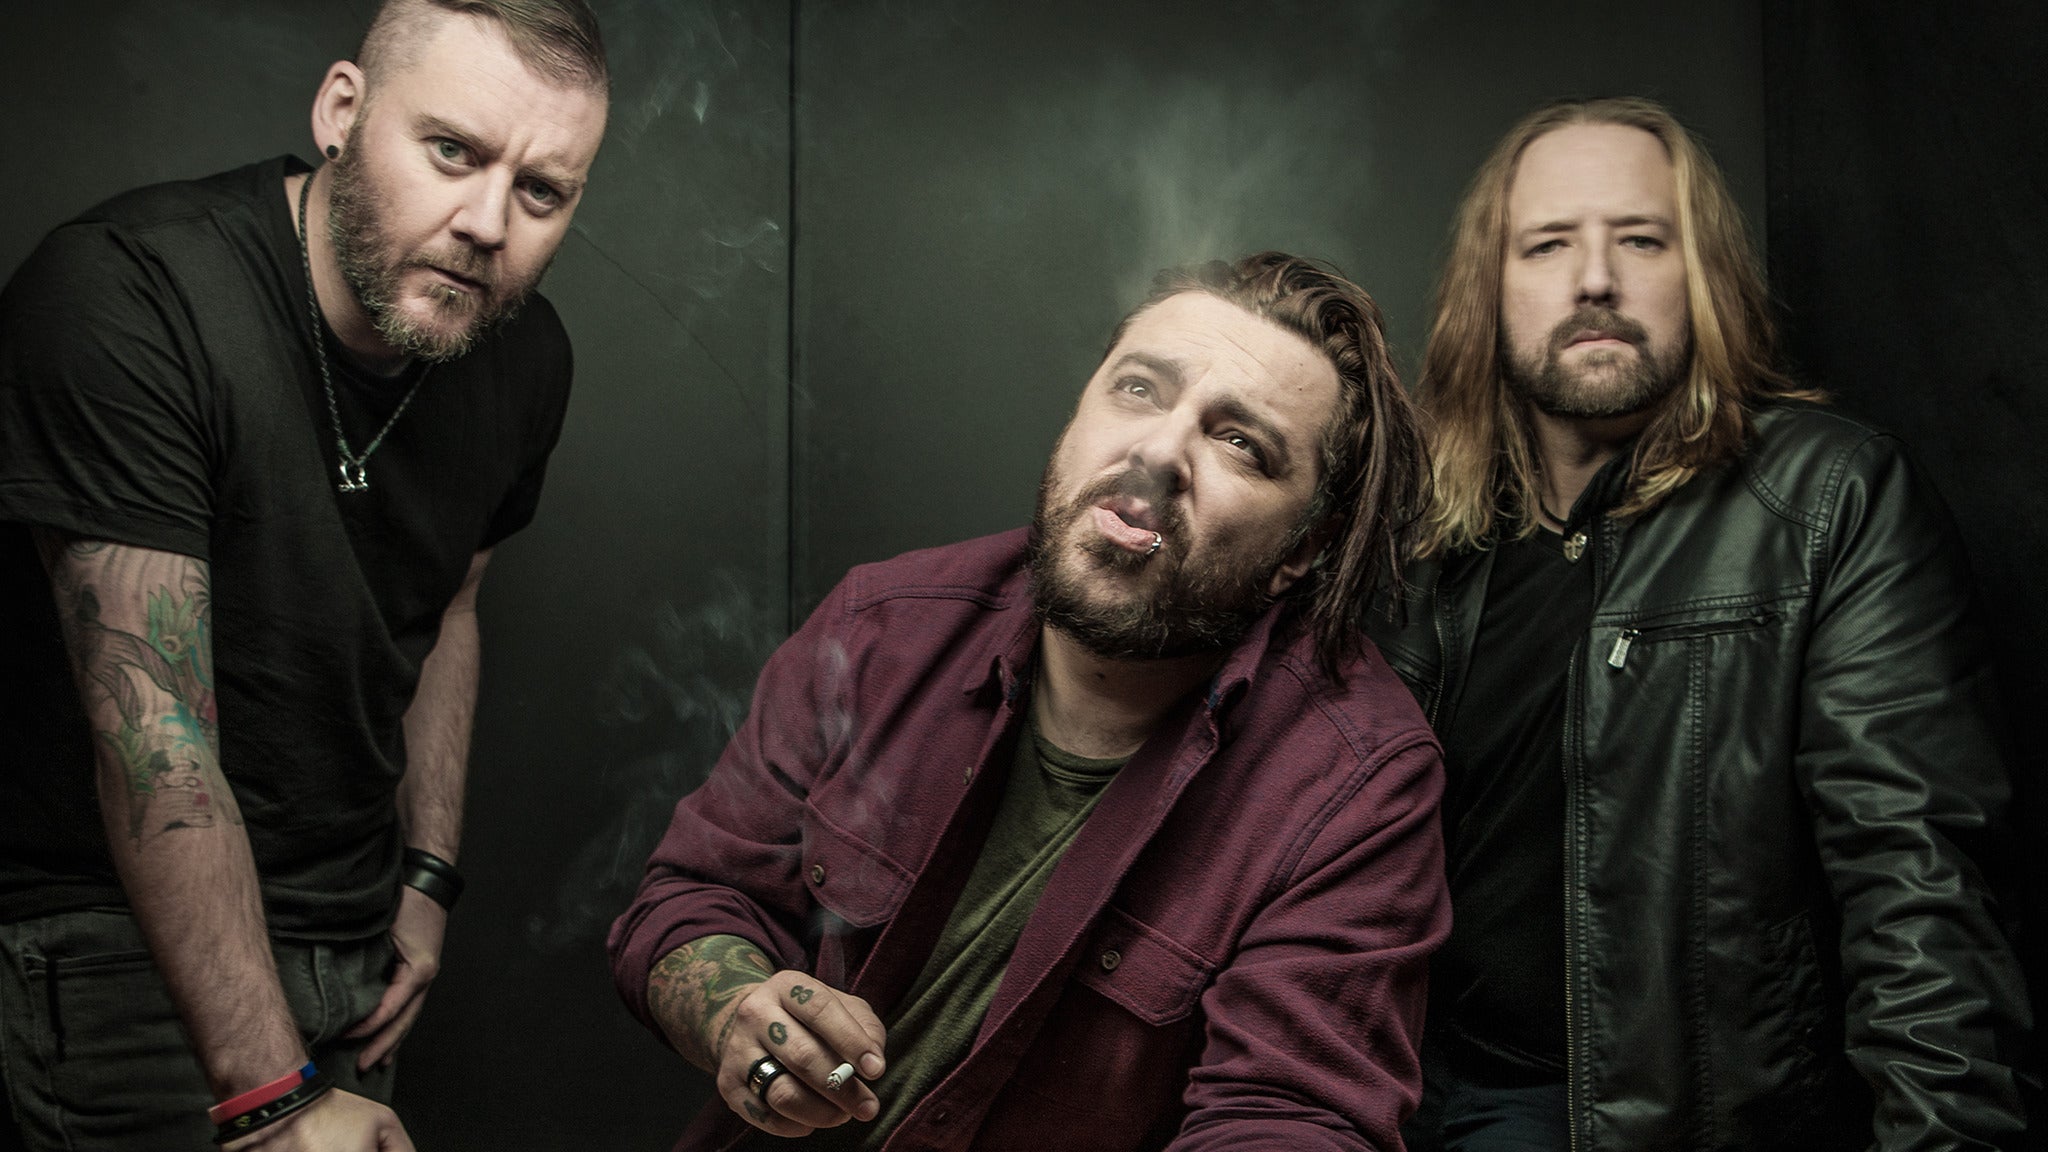 WiseGuys Seether at Minglewood Hall in Memphis May 24, 2022 presale